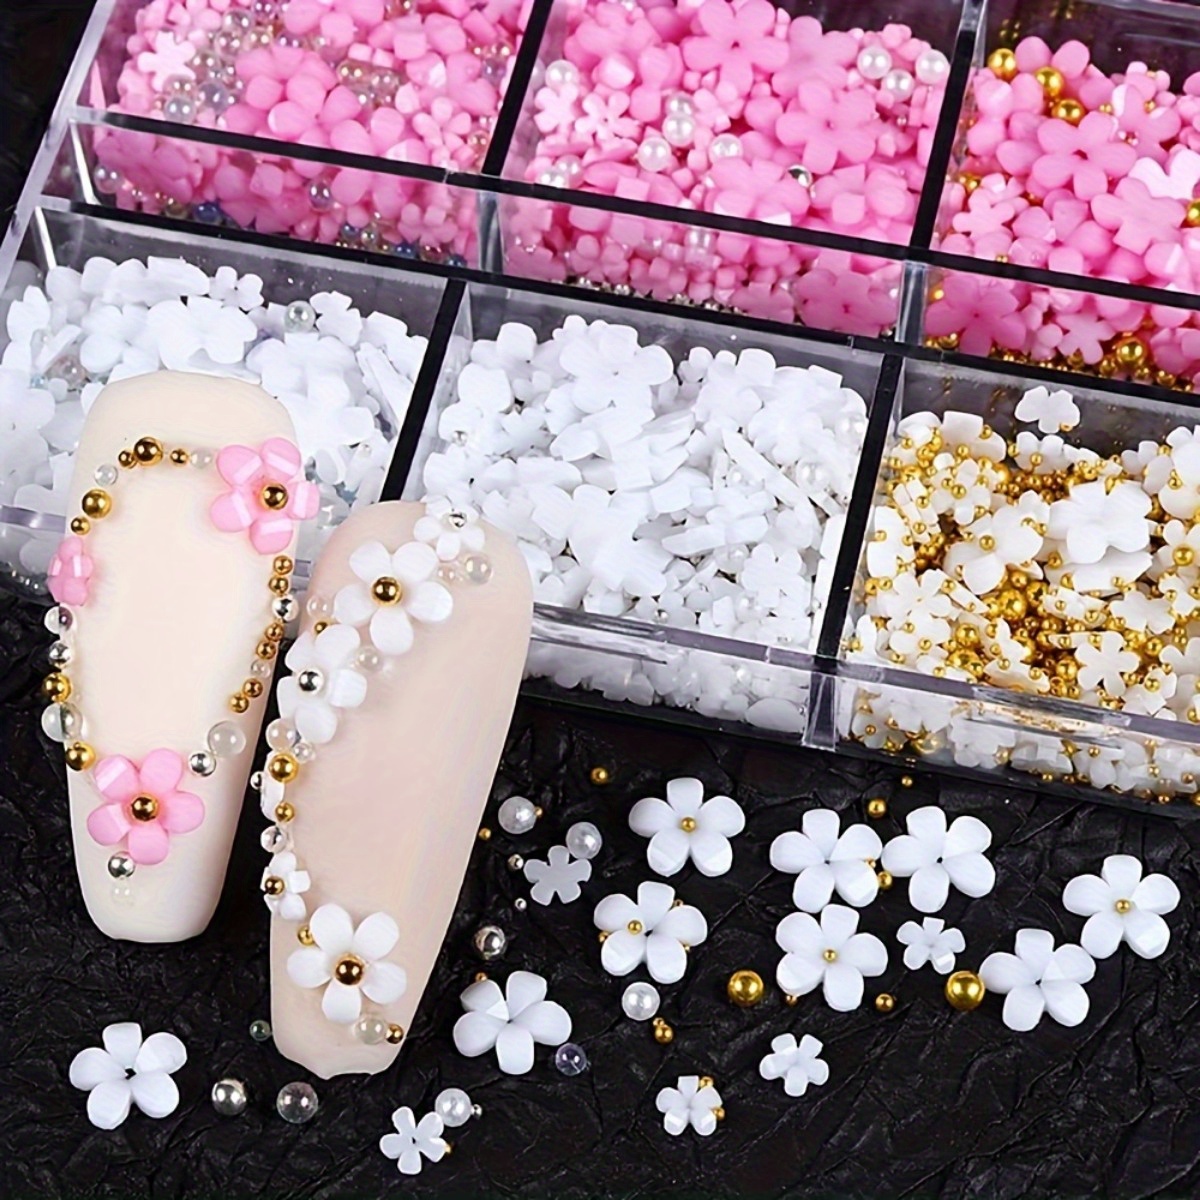 

2 Boxes 3d Flower Nail Charms, 3d Acrylic Flower Nail Art Rhinestones, White Pink Mixed Cherry Blossom Spring Acrylic Nail Supplies With Pearls Decor, Manicure Nail Decorations